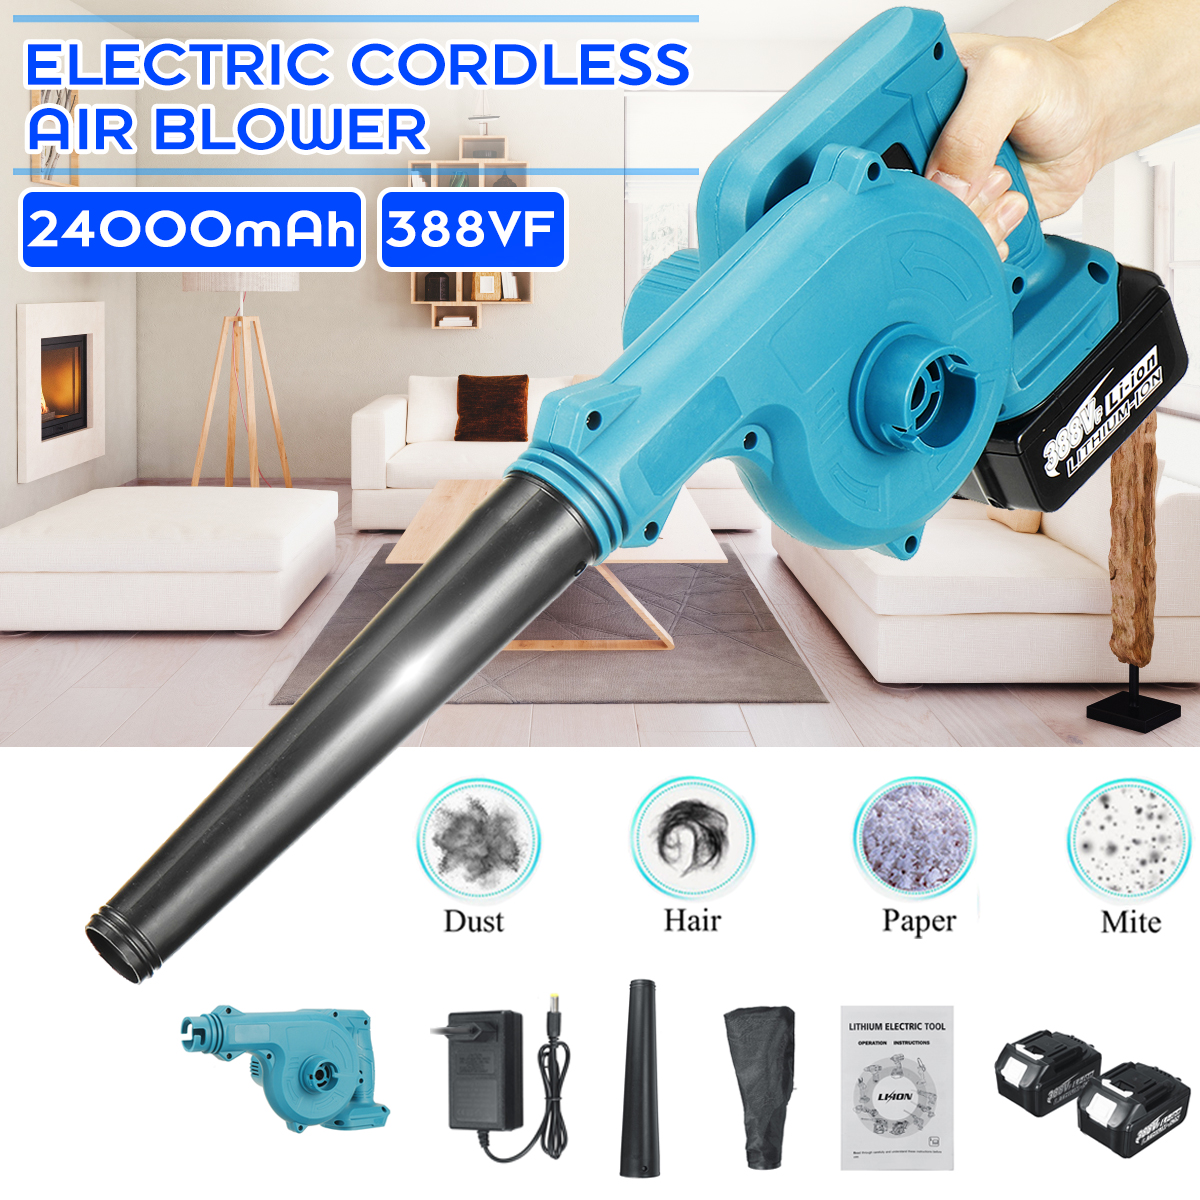 2200W-2-In-1-24Ah-Home-Car-Electric-Air-Blower-Vacuum-Dust-Sustion-Collector-Leaf-Blower-W-None12-24-1867944-3